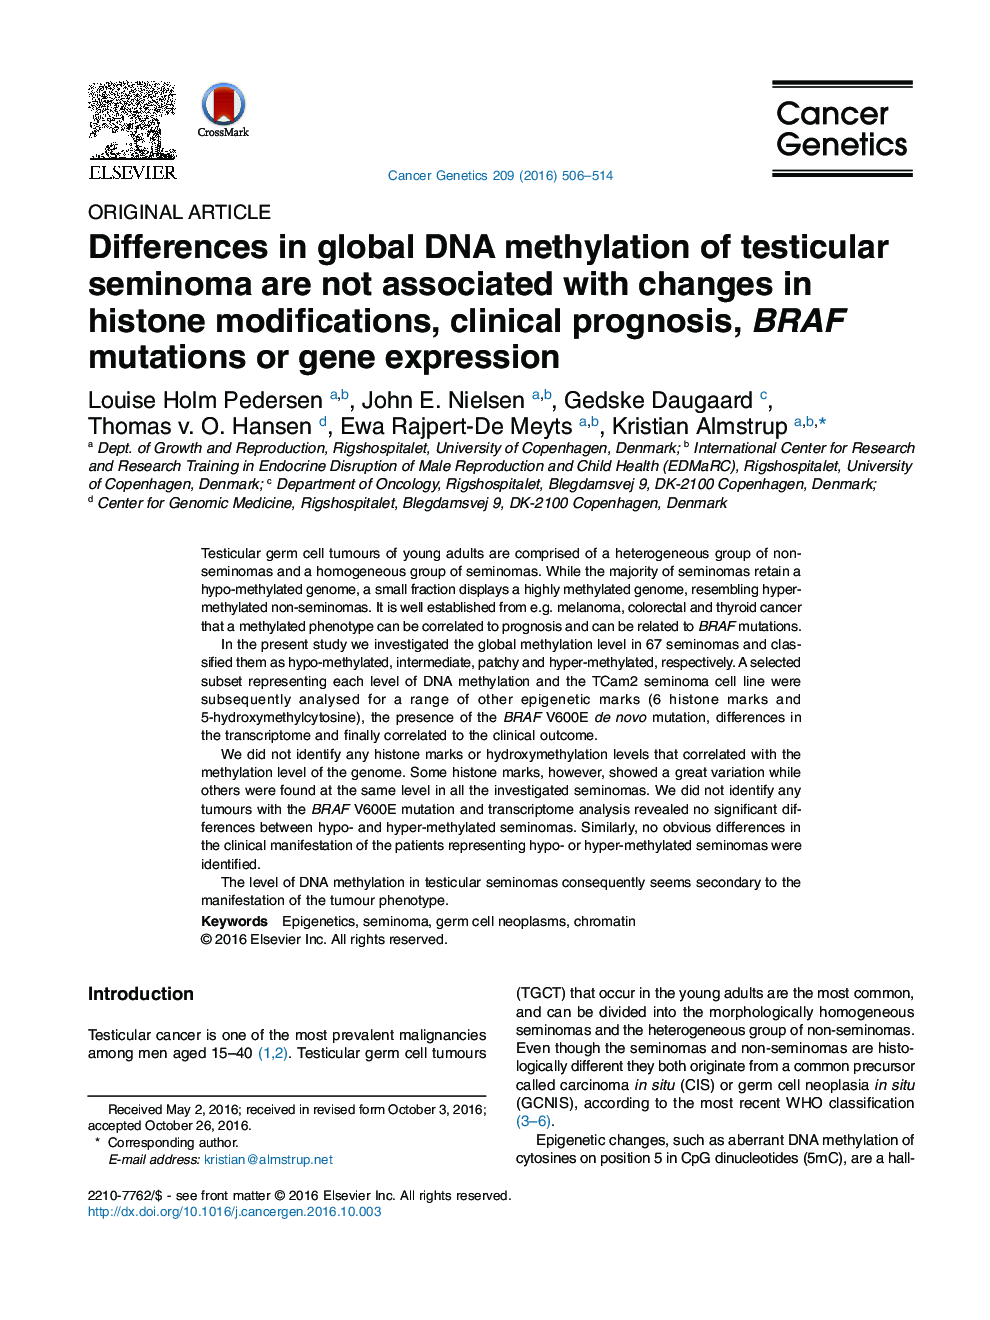 Original ArticleDifferences in global DNA methylation of testicular seminoma are not associated with changes in histone modifications, clinical prognosis, BRAF mutations or gene expression